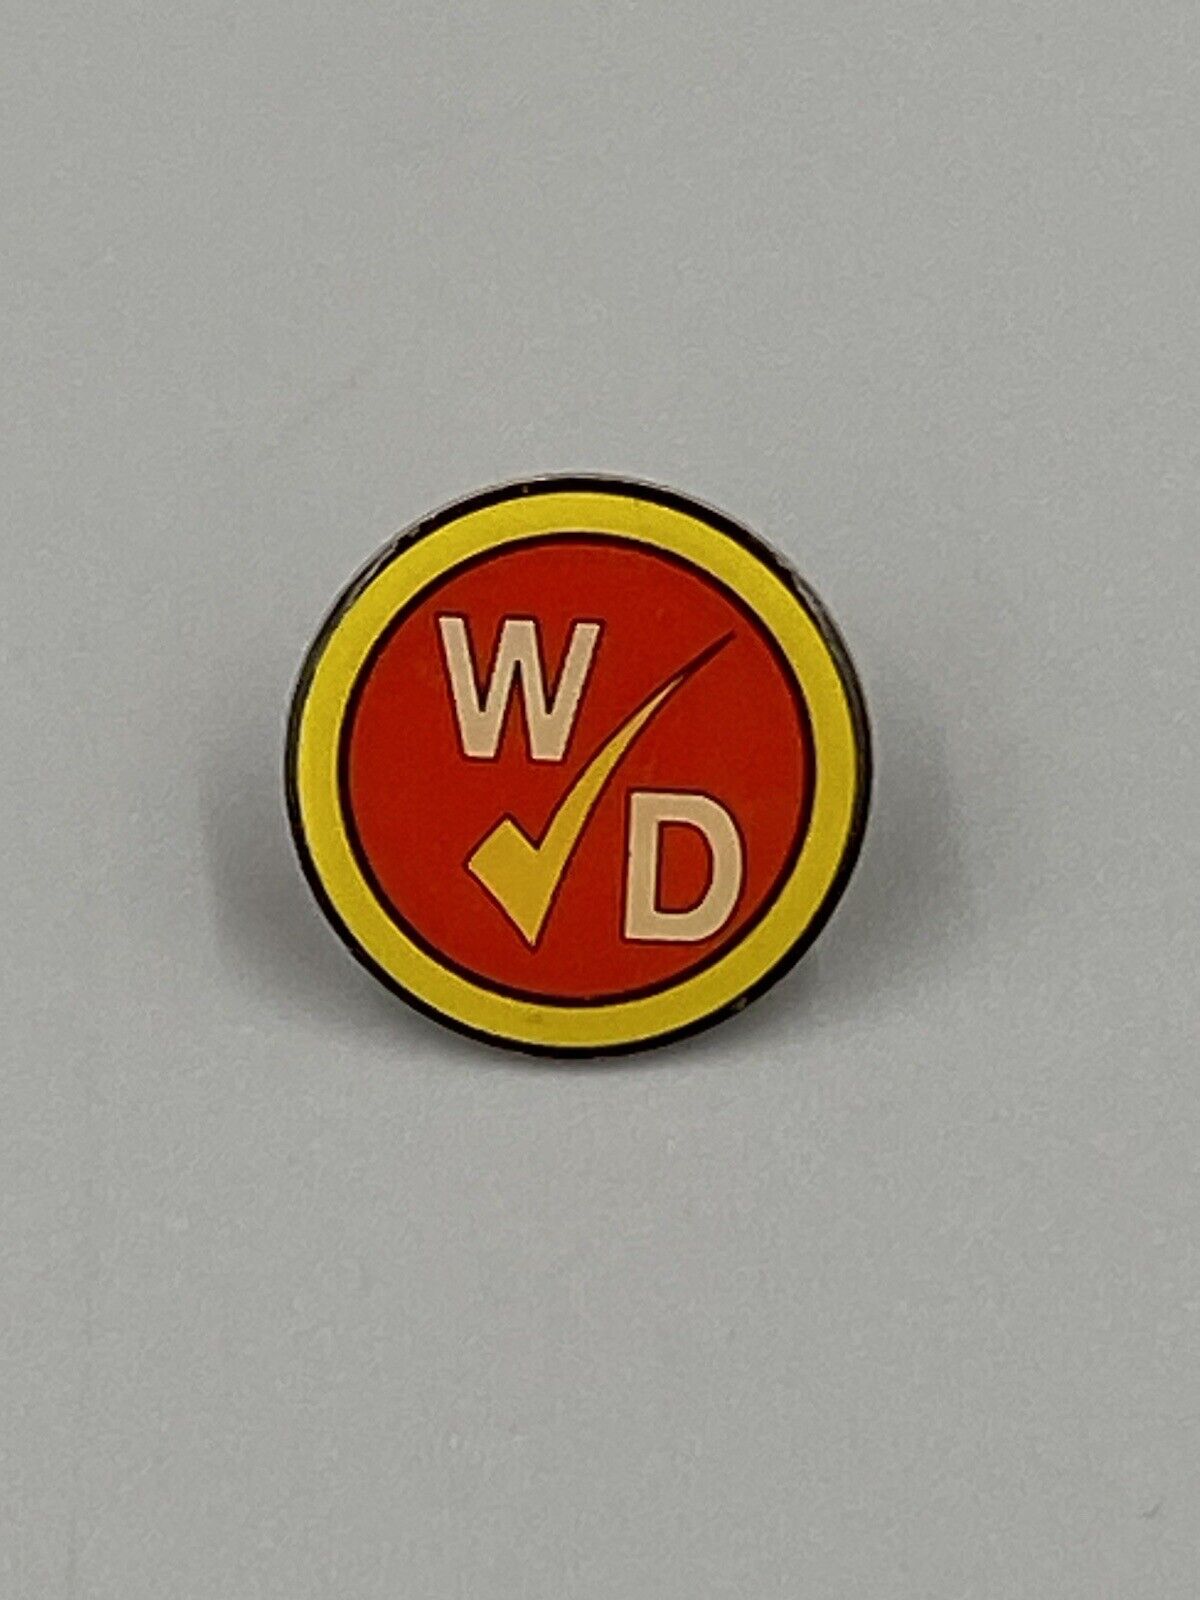 Vintage WINN DIXIE Red And Yellow Round Lapel Pin Brooch